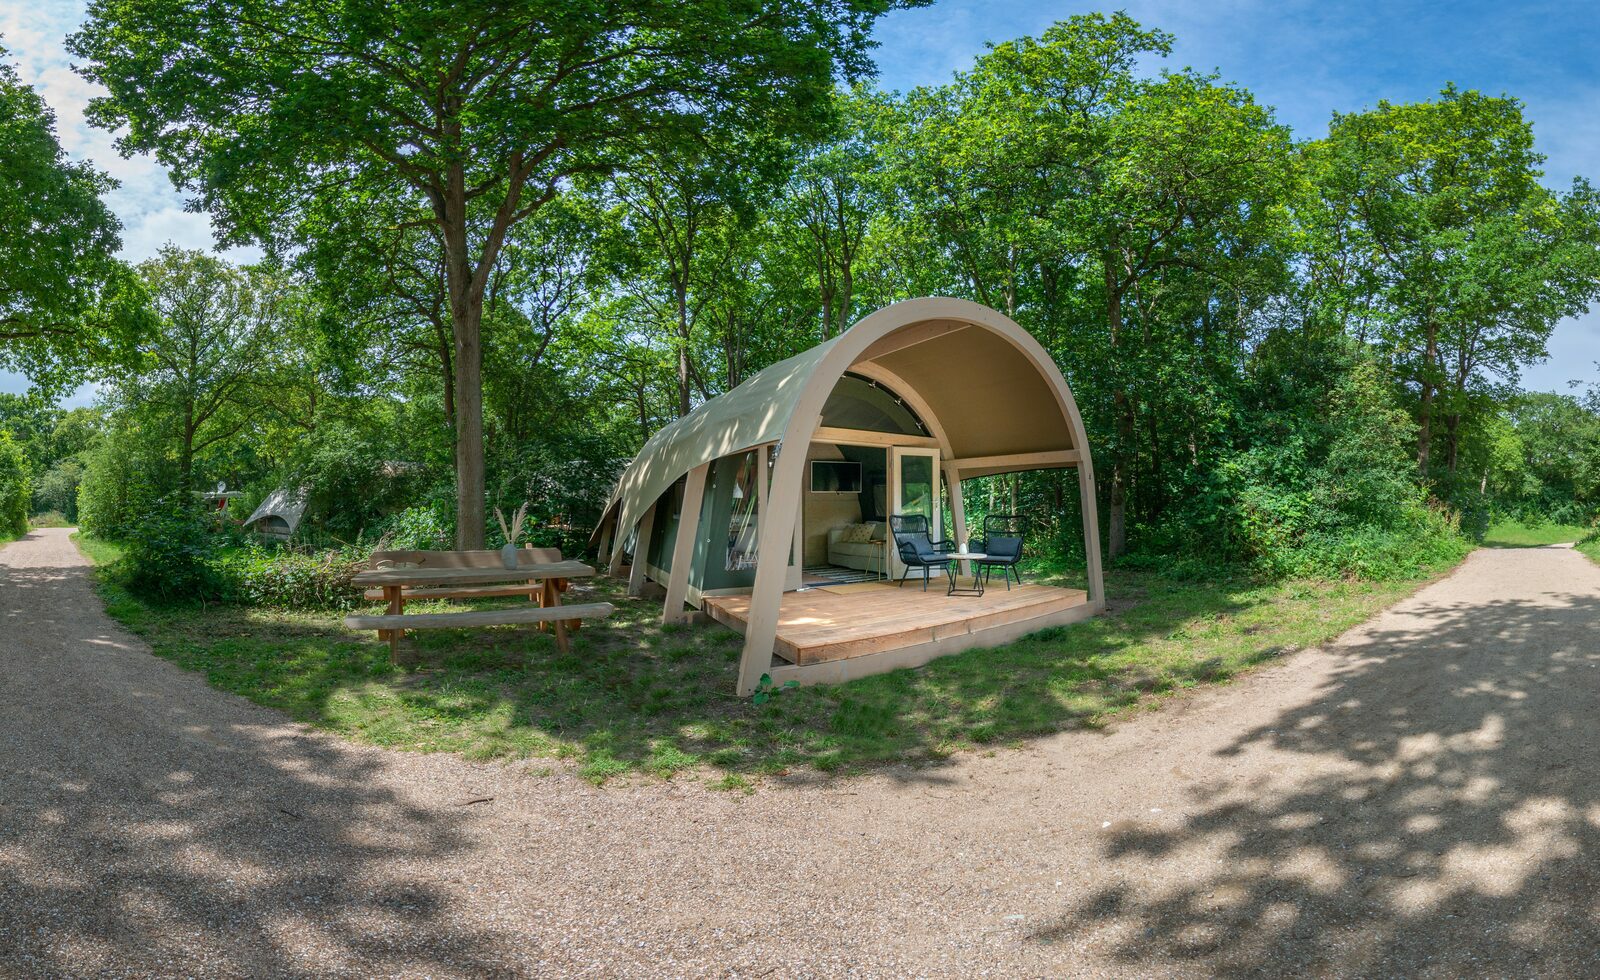 Book your summer vacation on our glamping